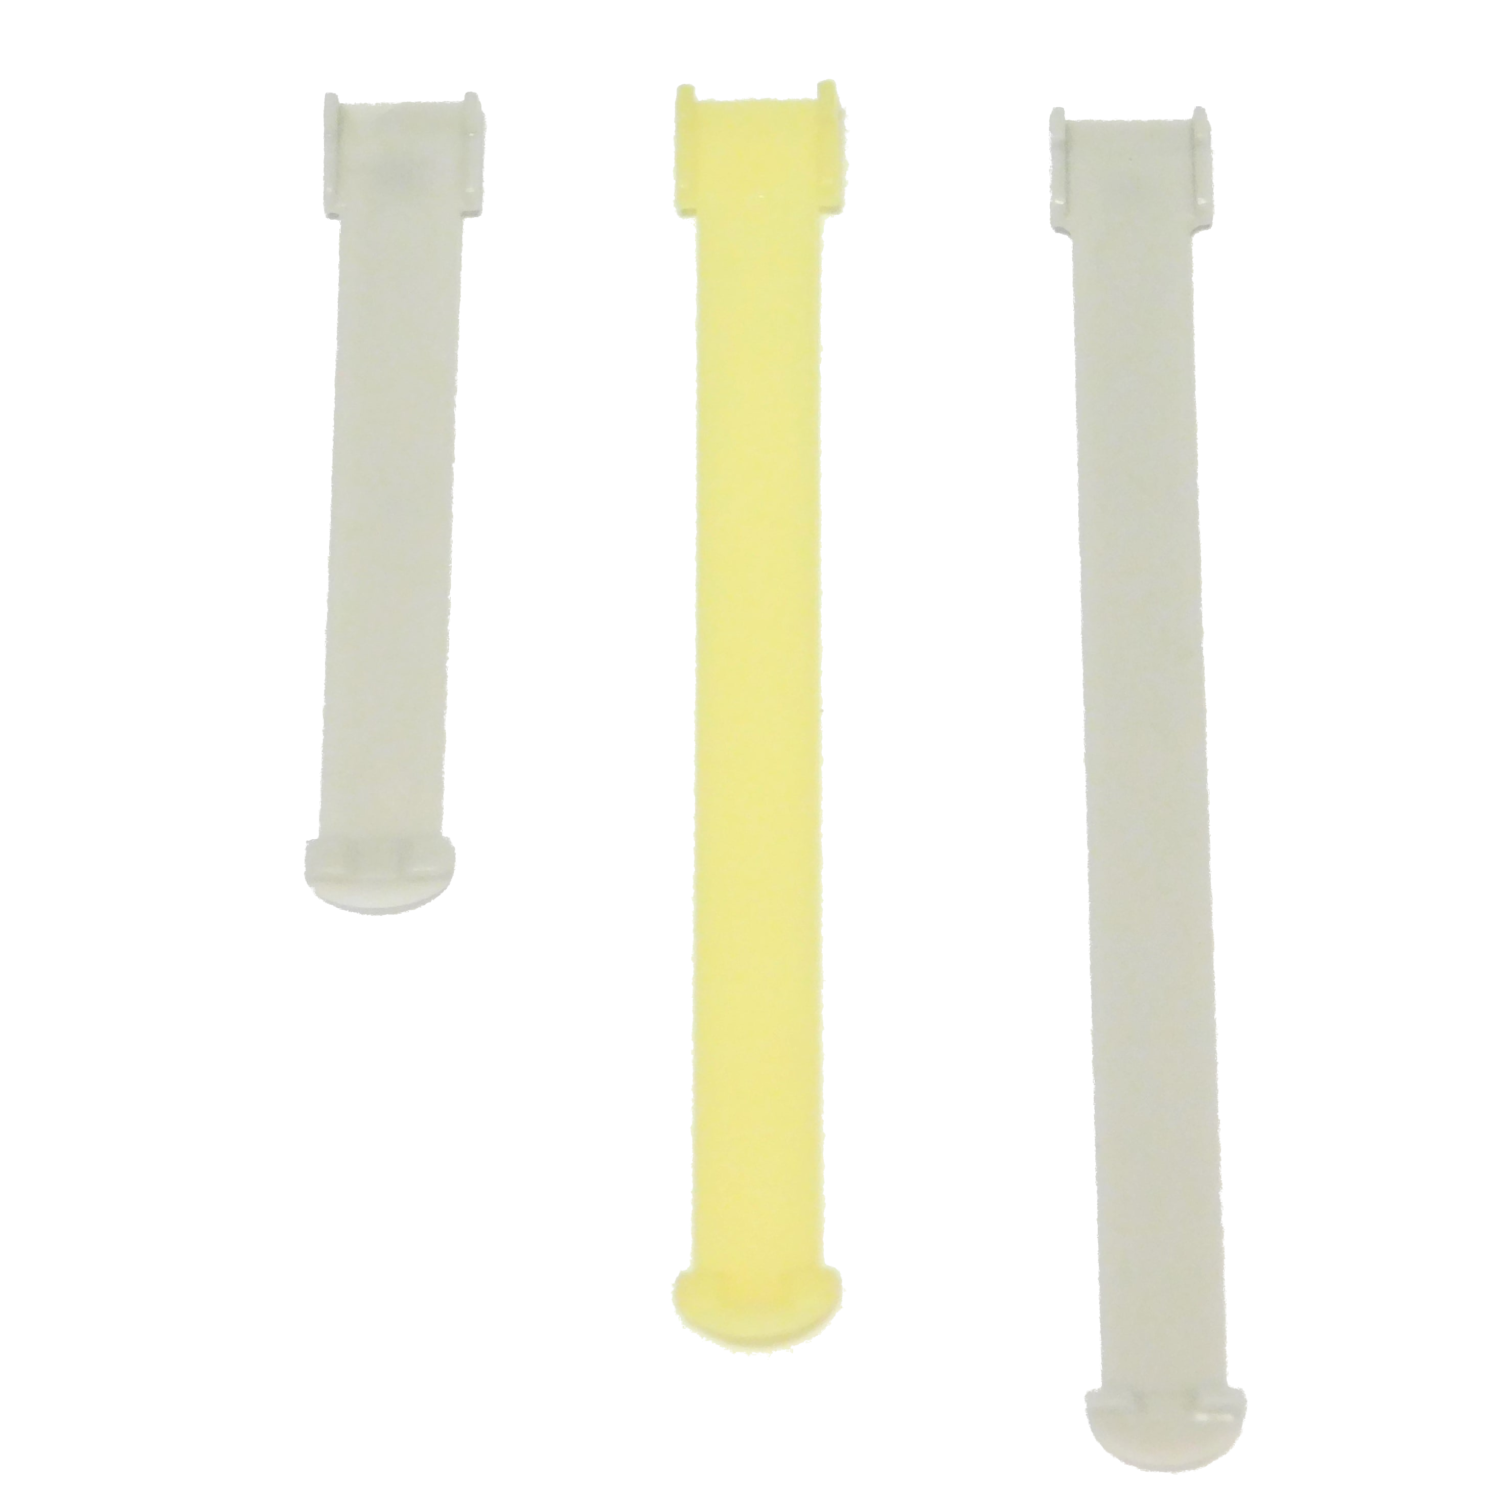 2 QTY Carrier With 78mm Mental Strap/Spacer for Vertical Blinds/Shades 